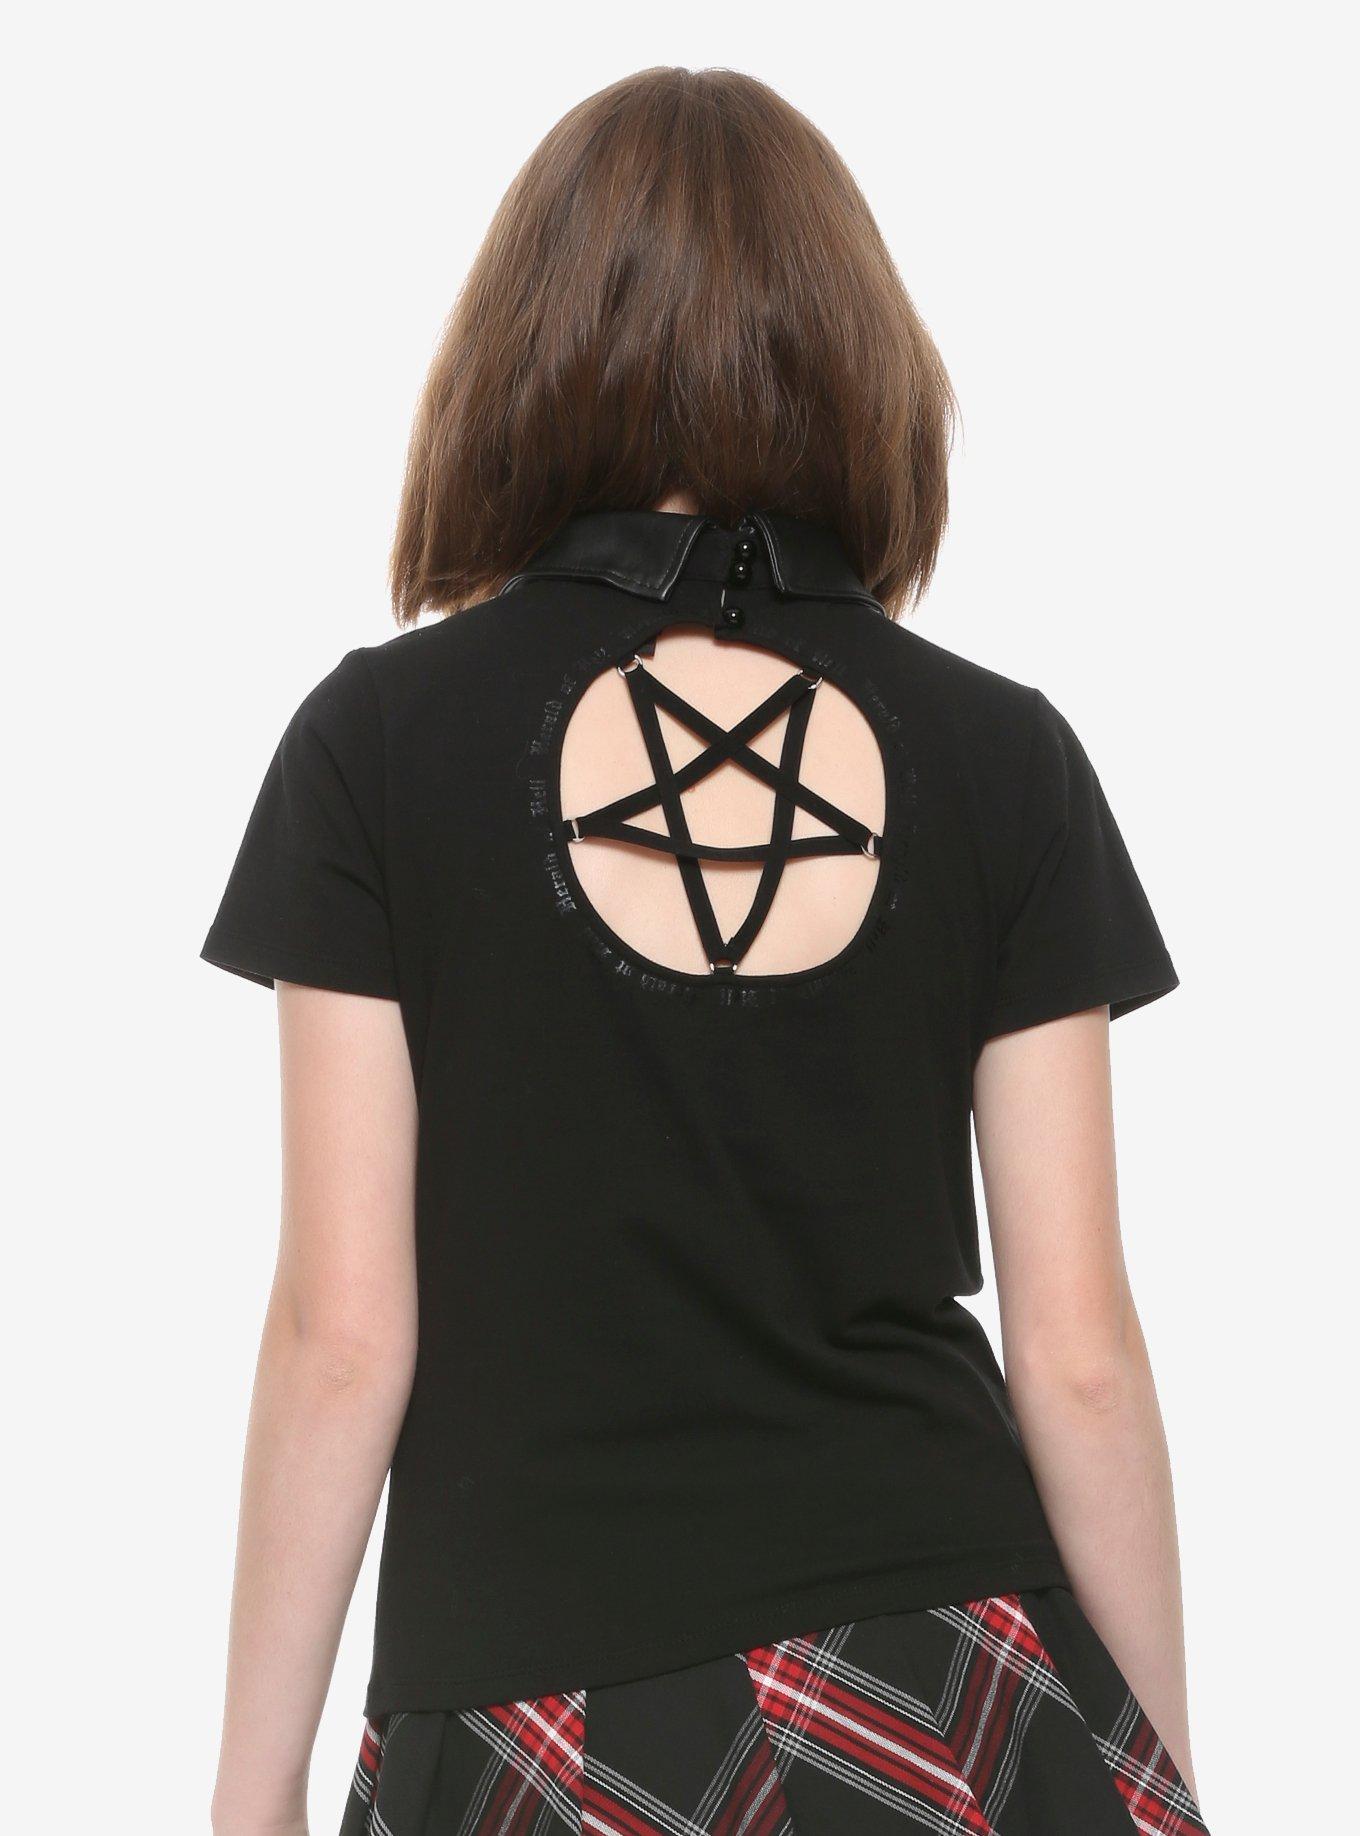 Chilling Adventures Of Sabrina Herald Of Hell Girls Collared Top, BLACK, hi-res